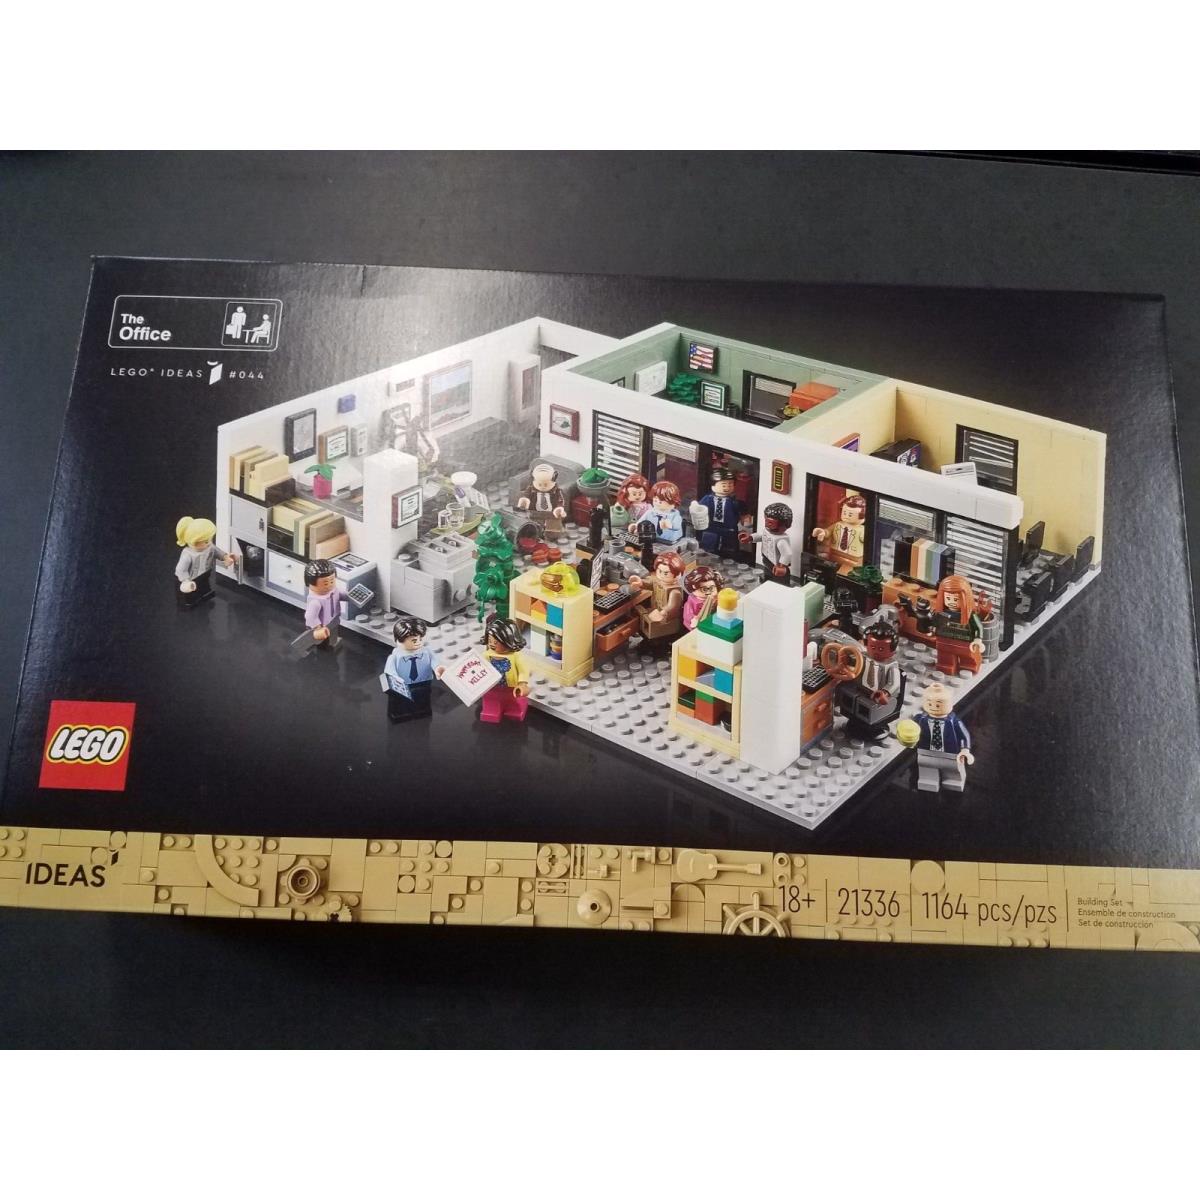 Lego 21336 The Office Building in Hand Ship Following Day